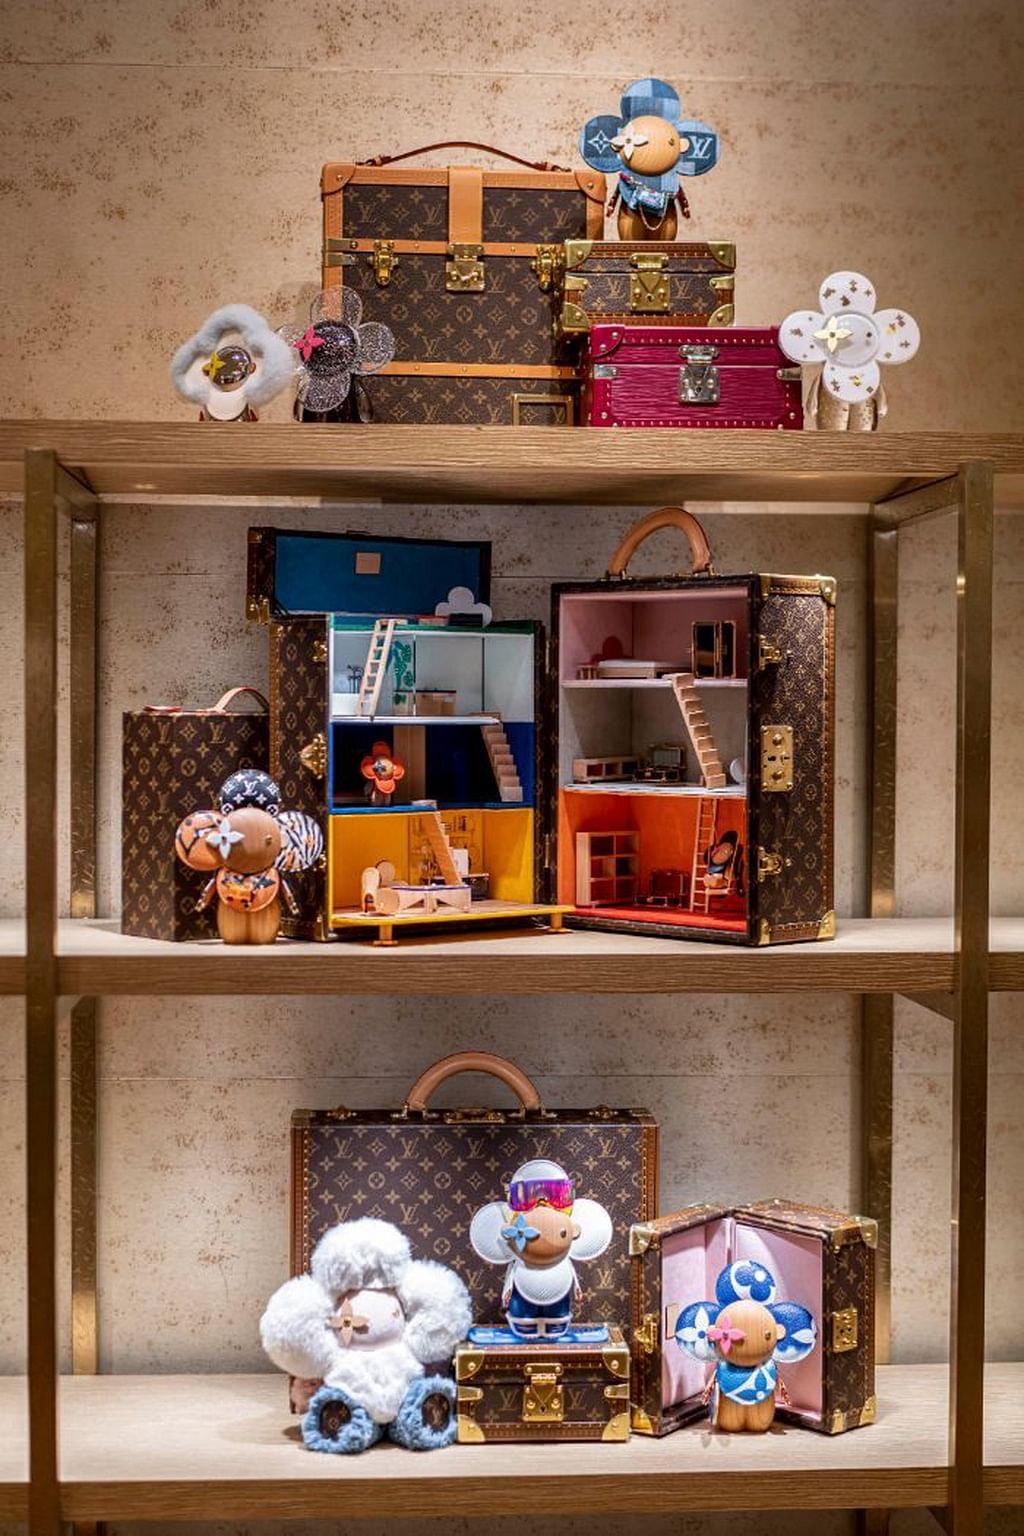 Discover Louis Vuitton's savoire faire in an oasis getaway - The